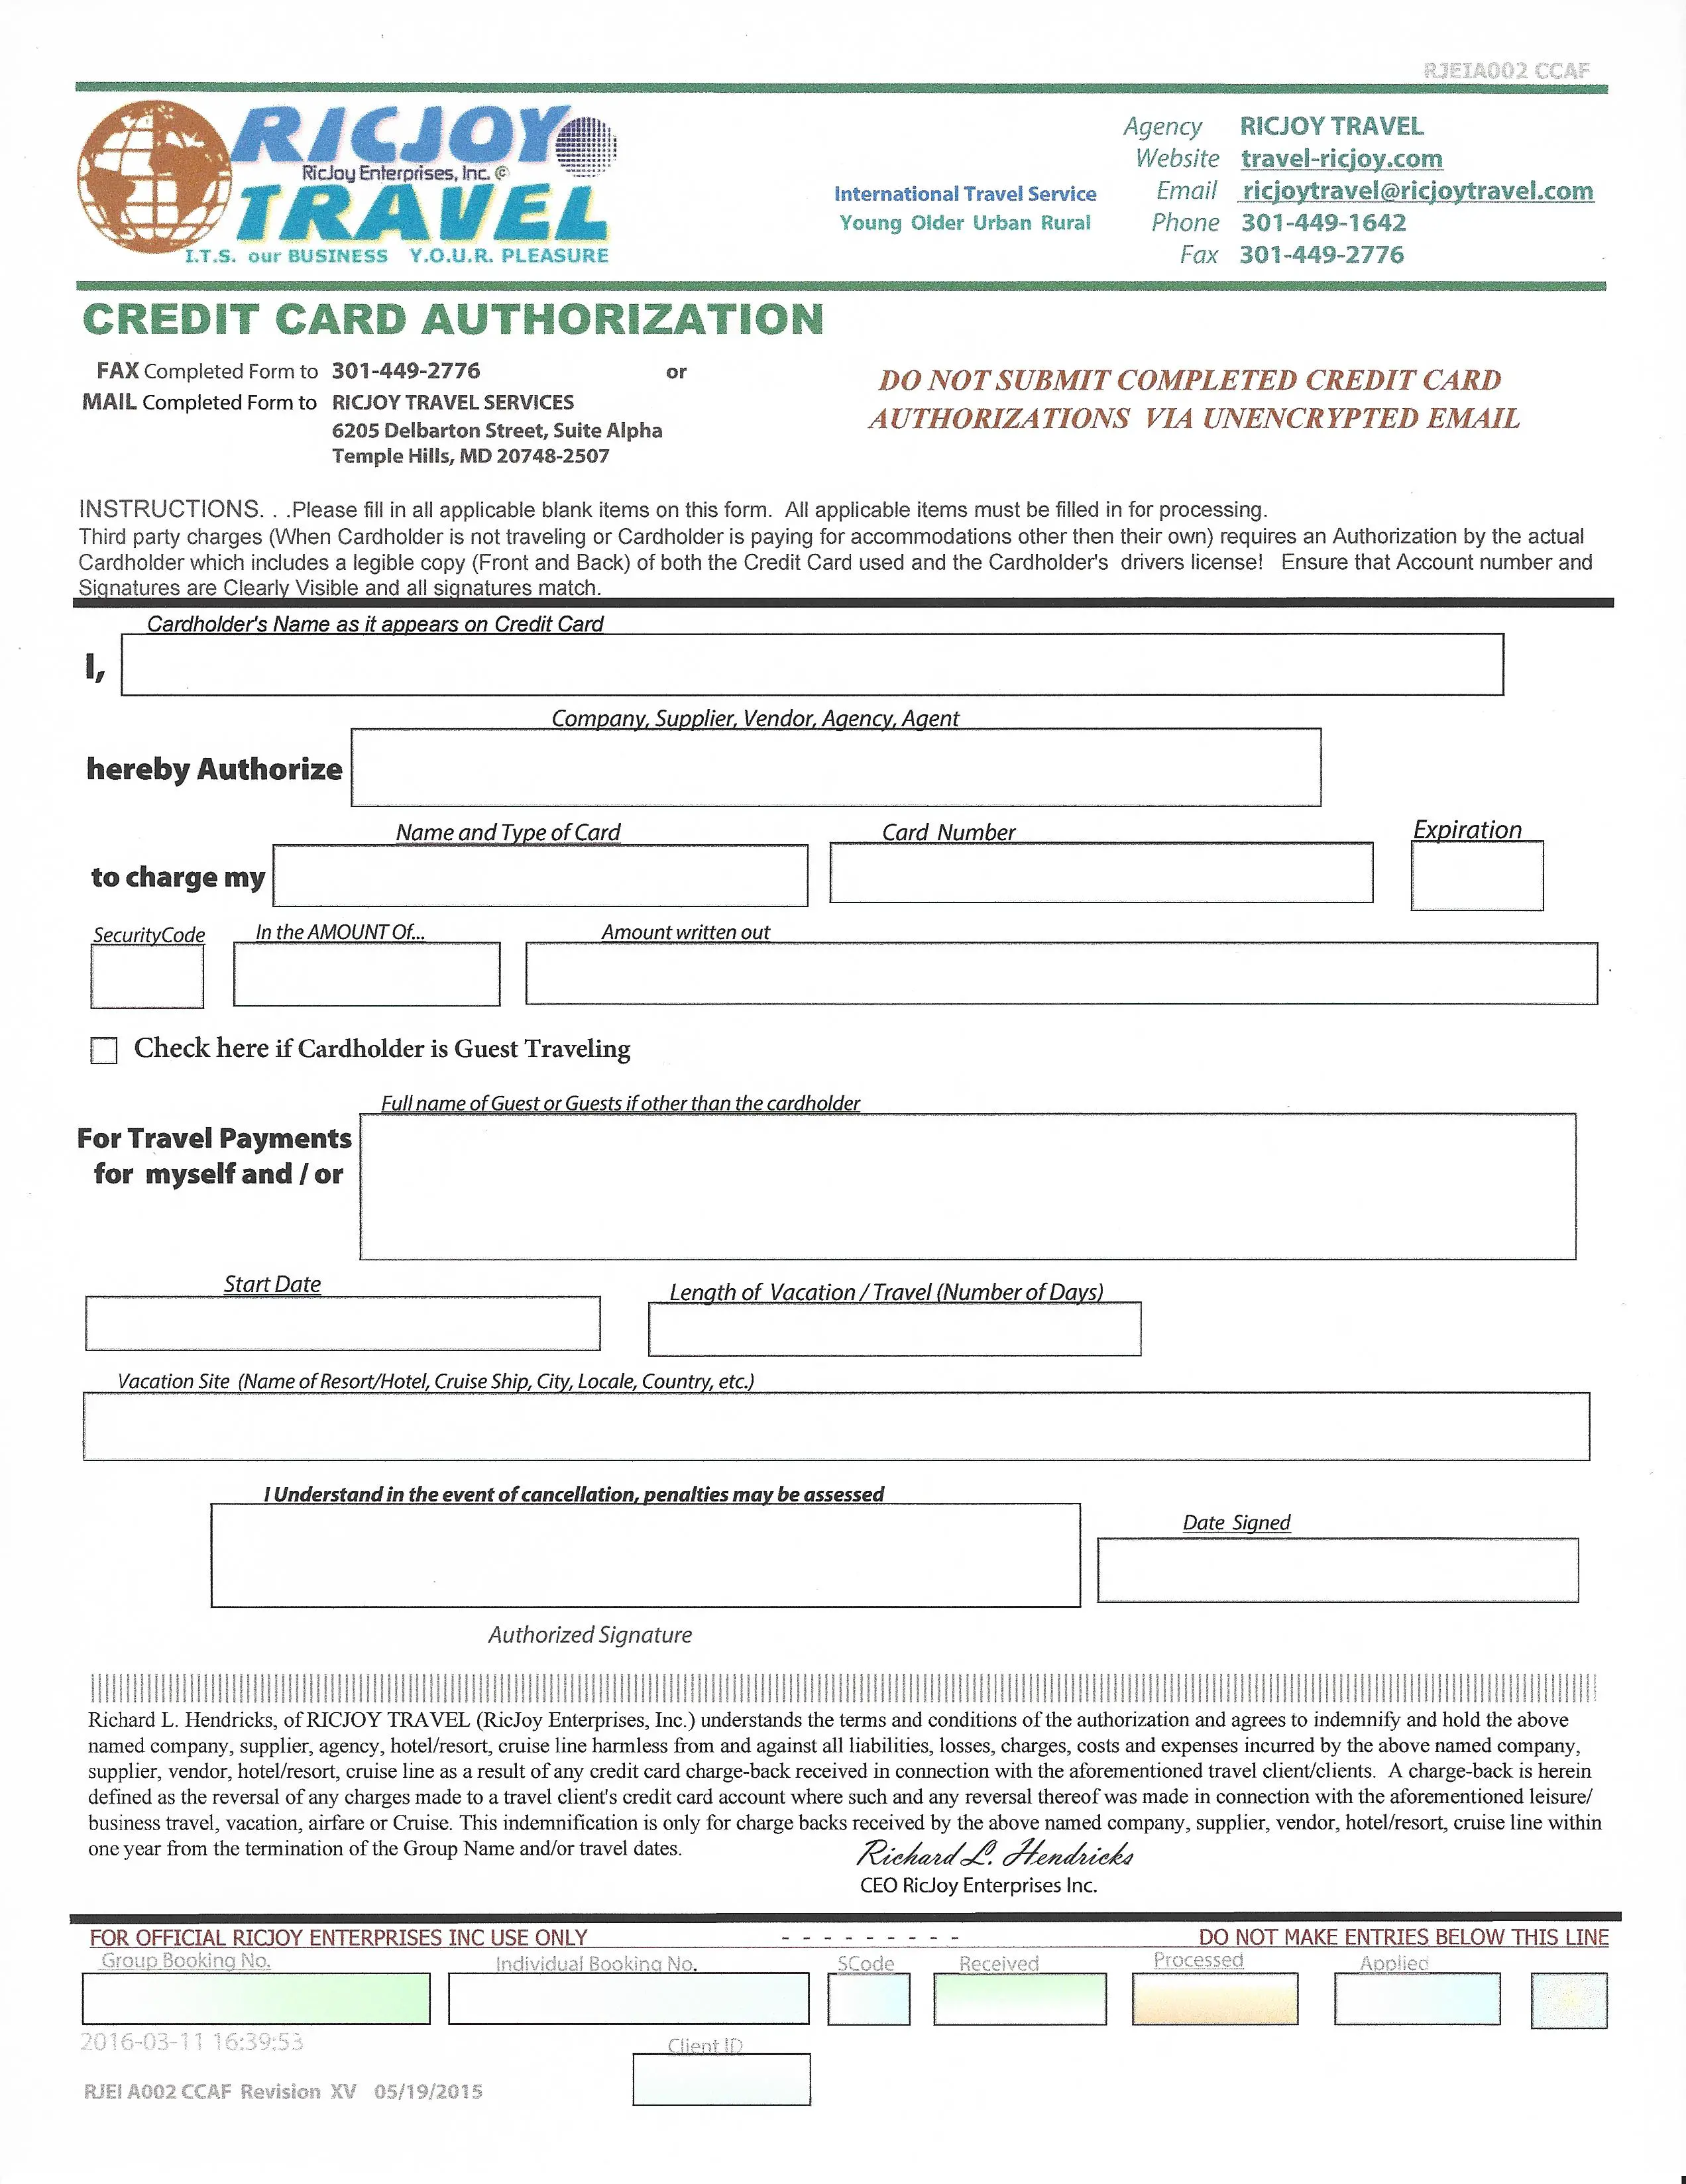 Credit Card Authorization Form template free download business forms